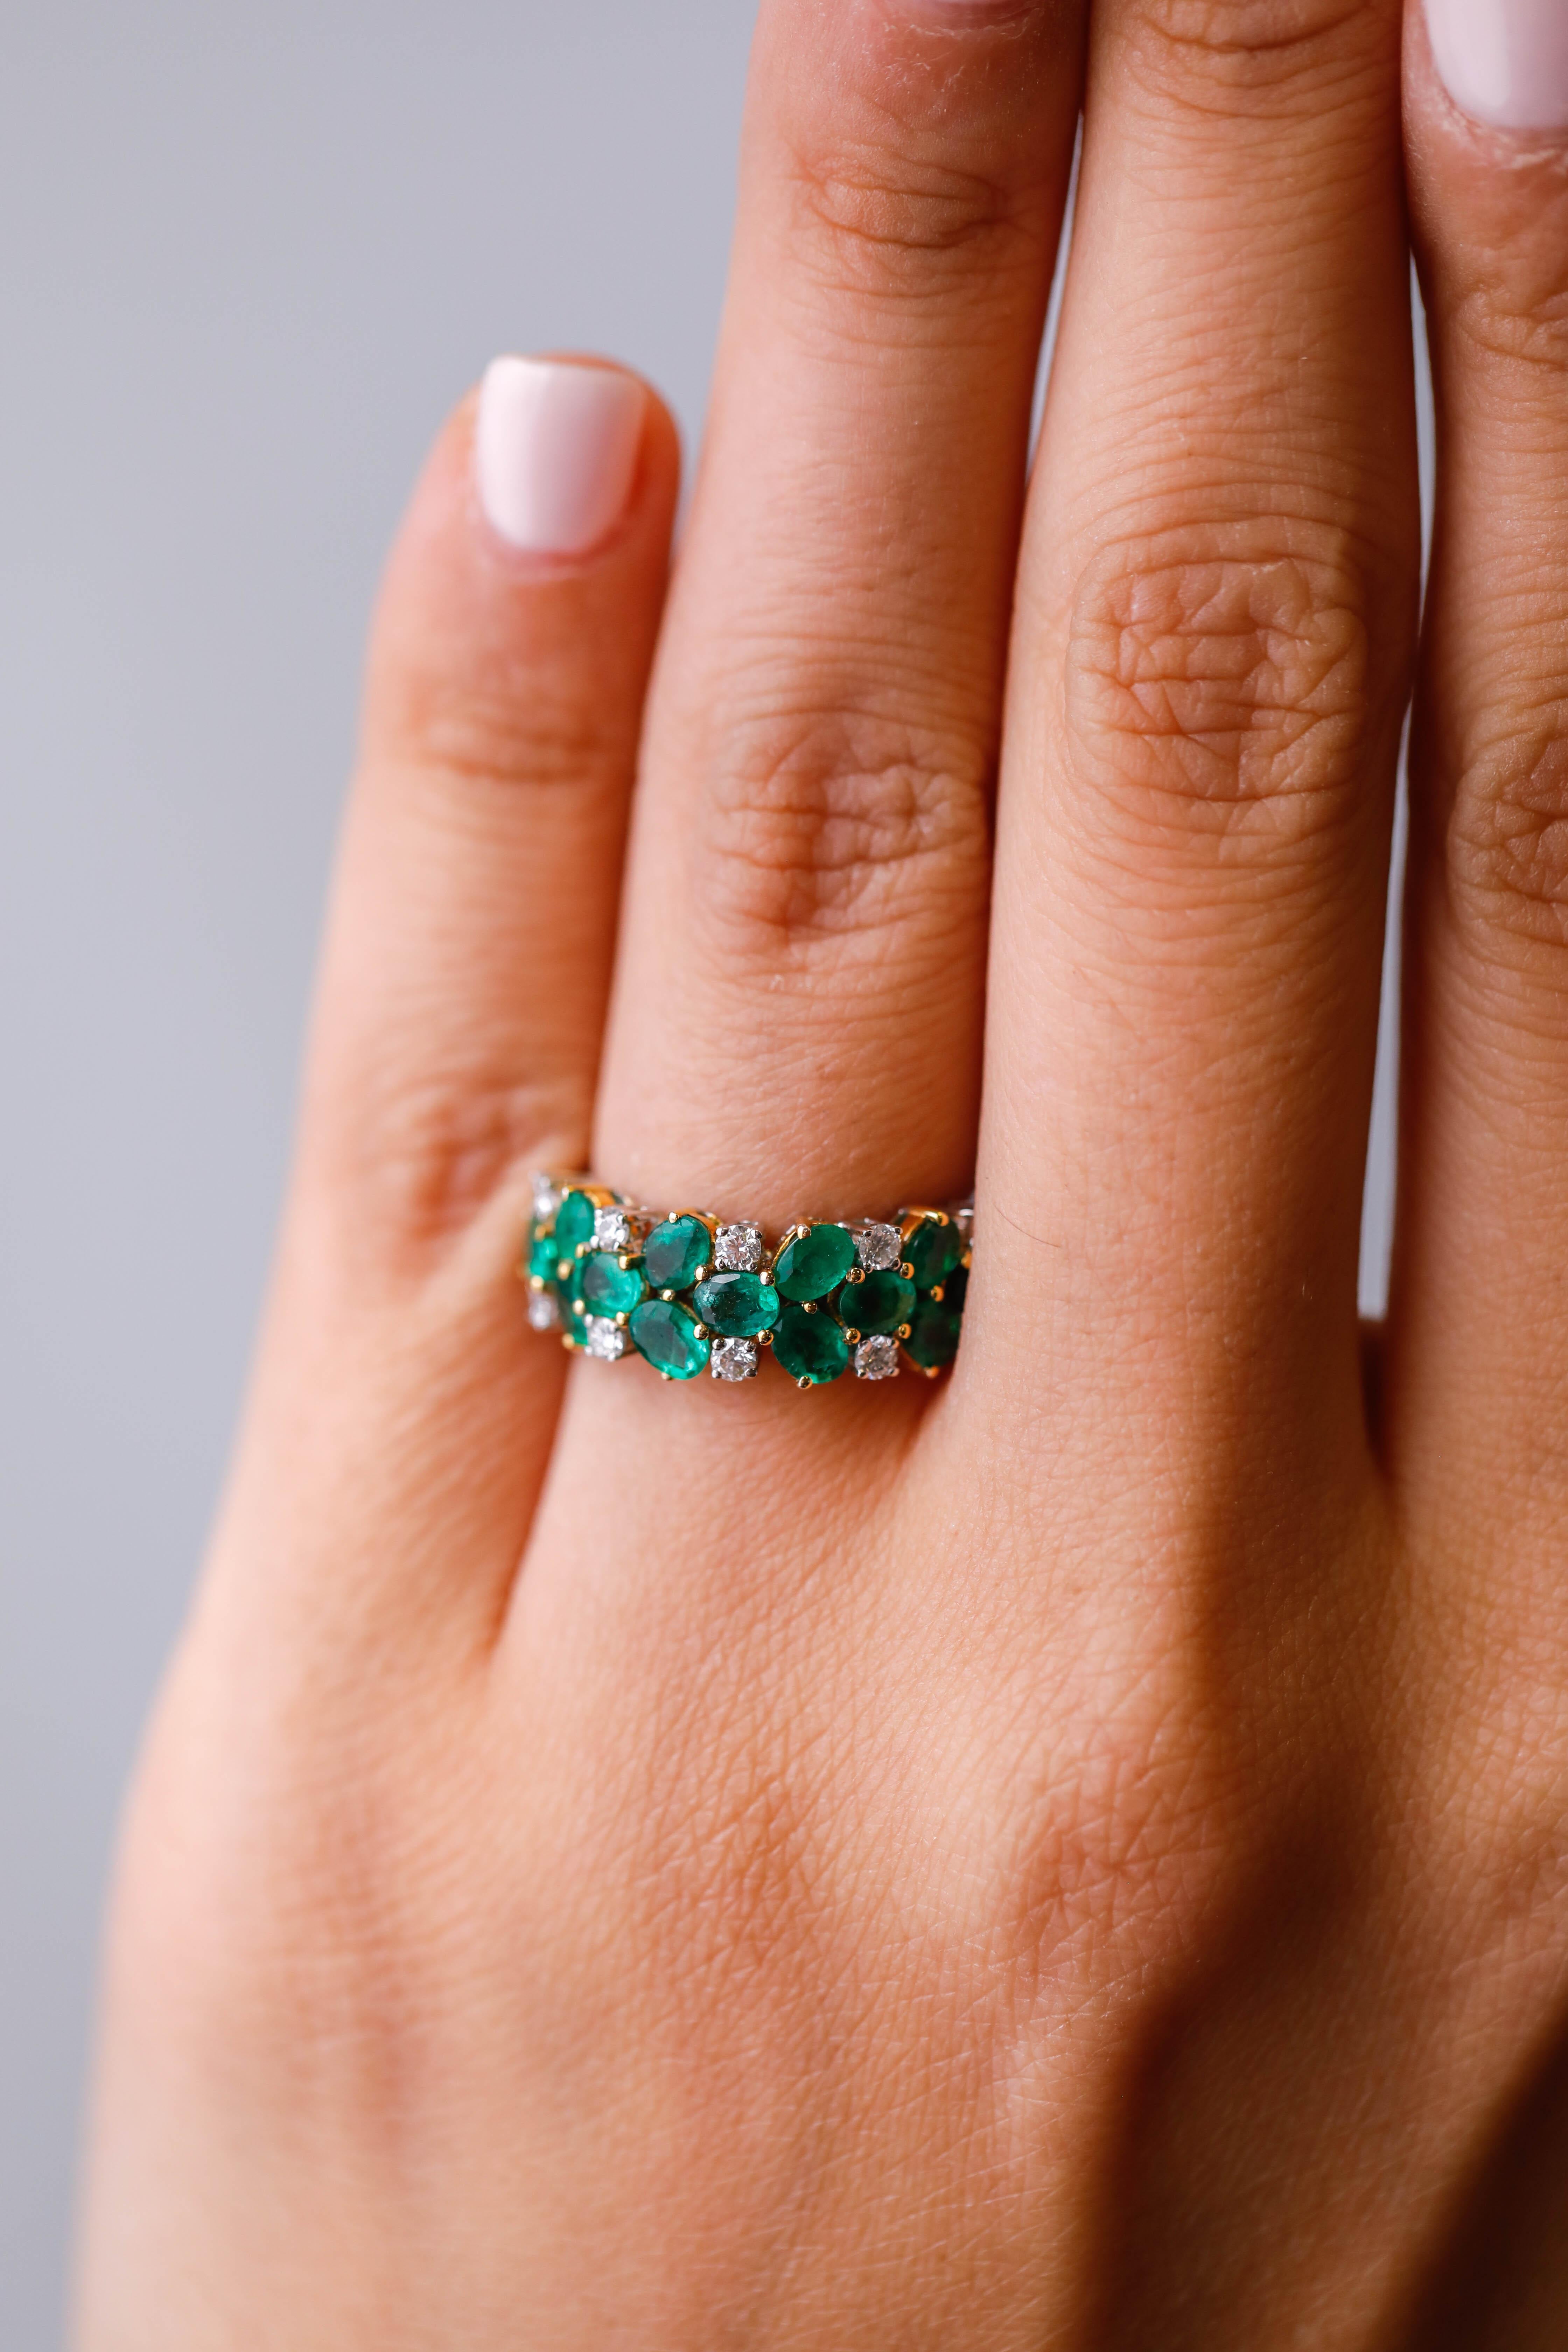 Contemporary 1.95 Carat Oval Emerald and 0.34 Carat Round Diamond Ring in 18 Karat White Gold